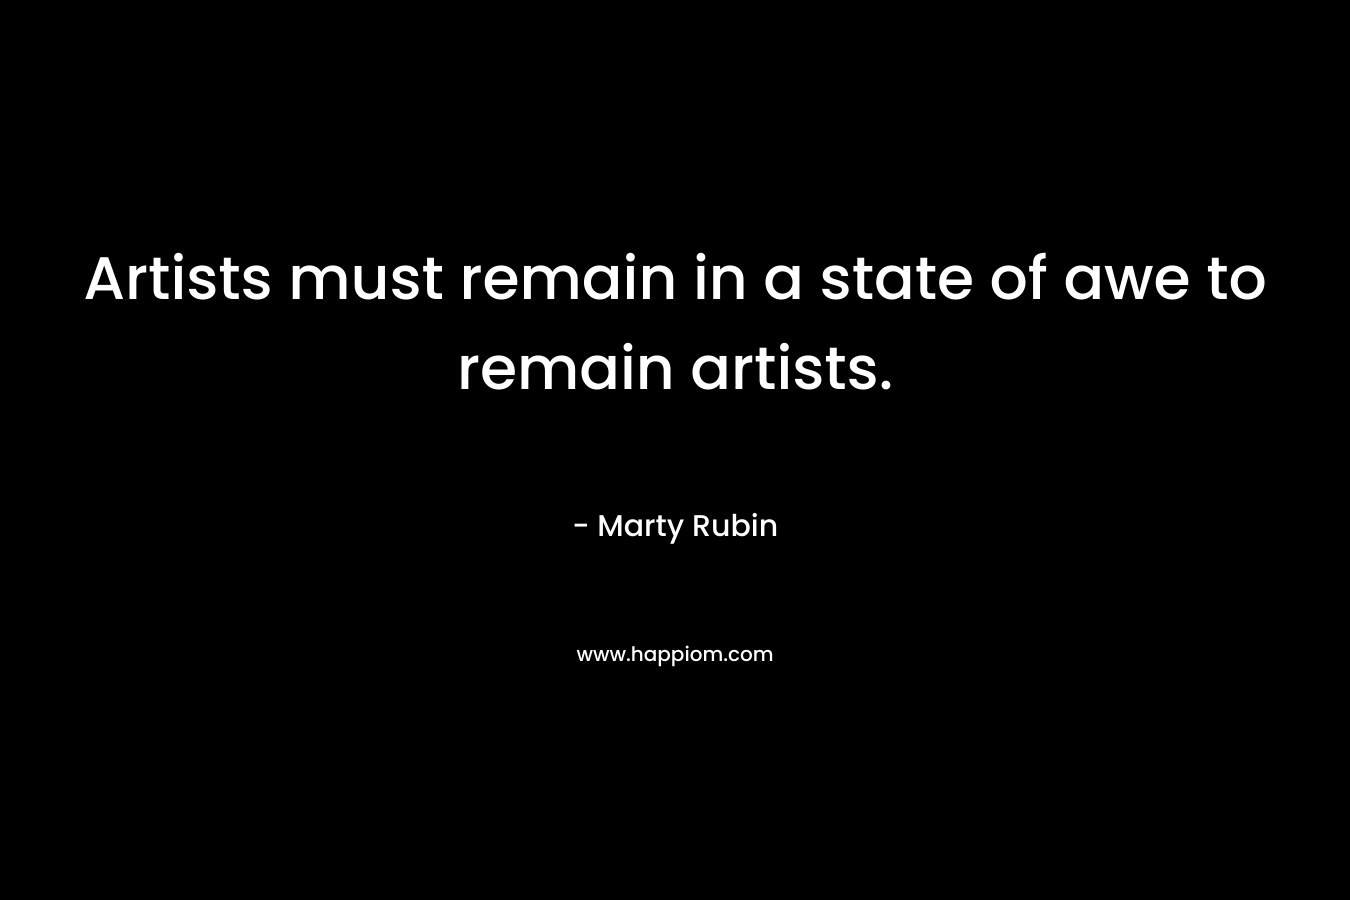 Artists must remain in a state of awe to remain artists.